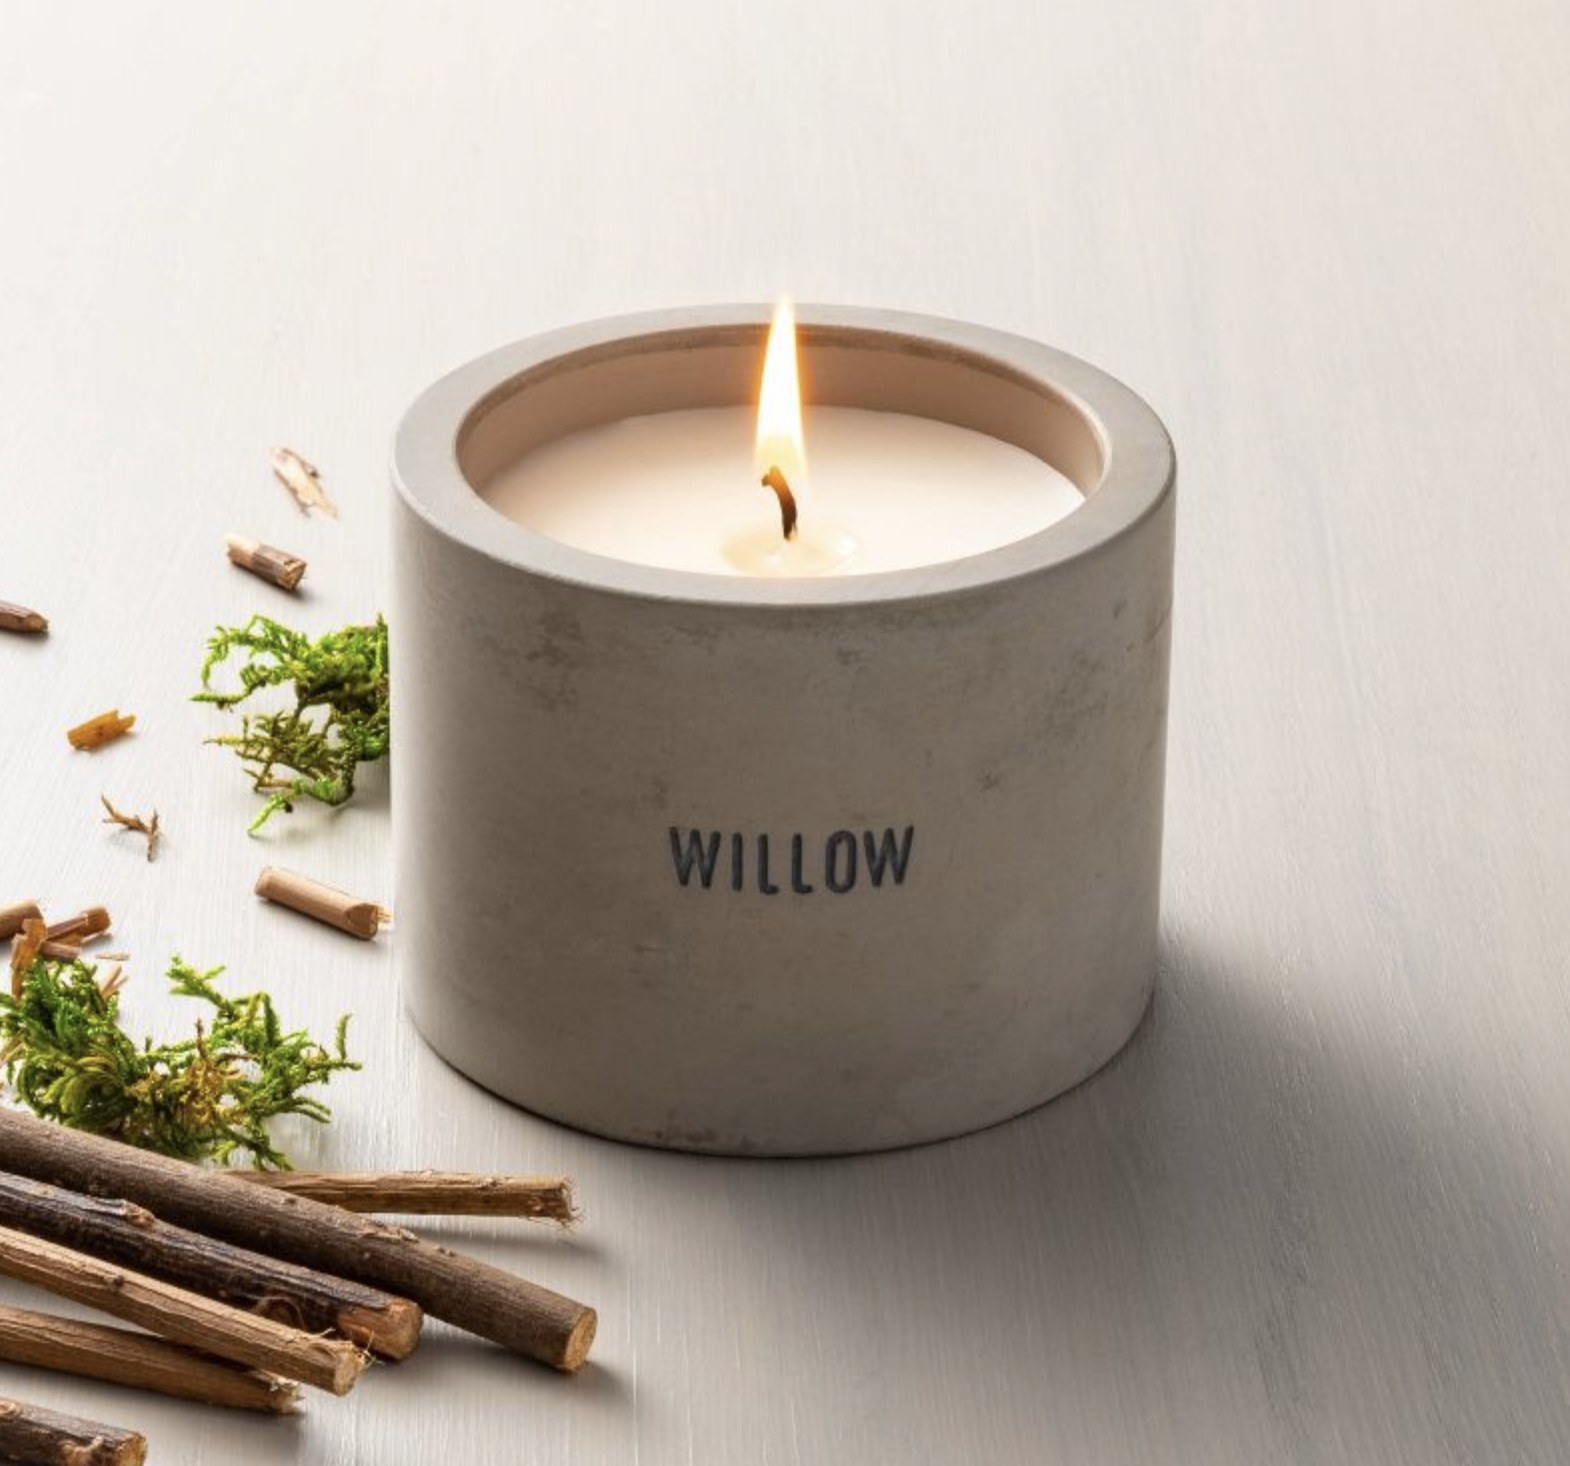 Willow candle from Target